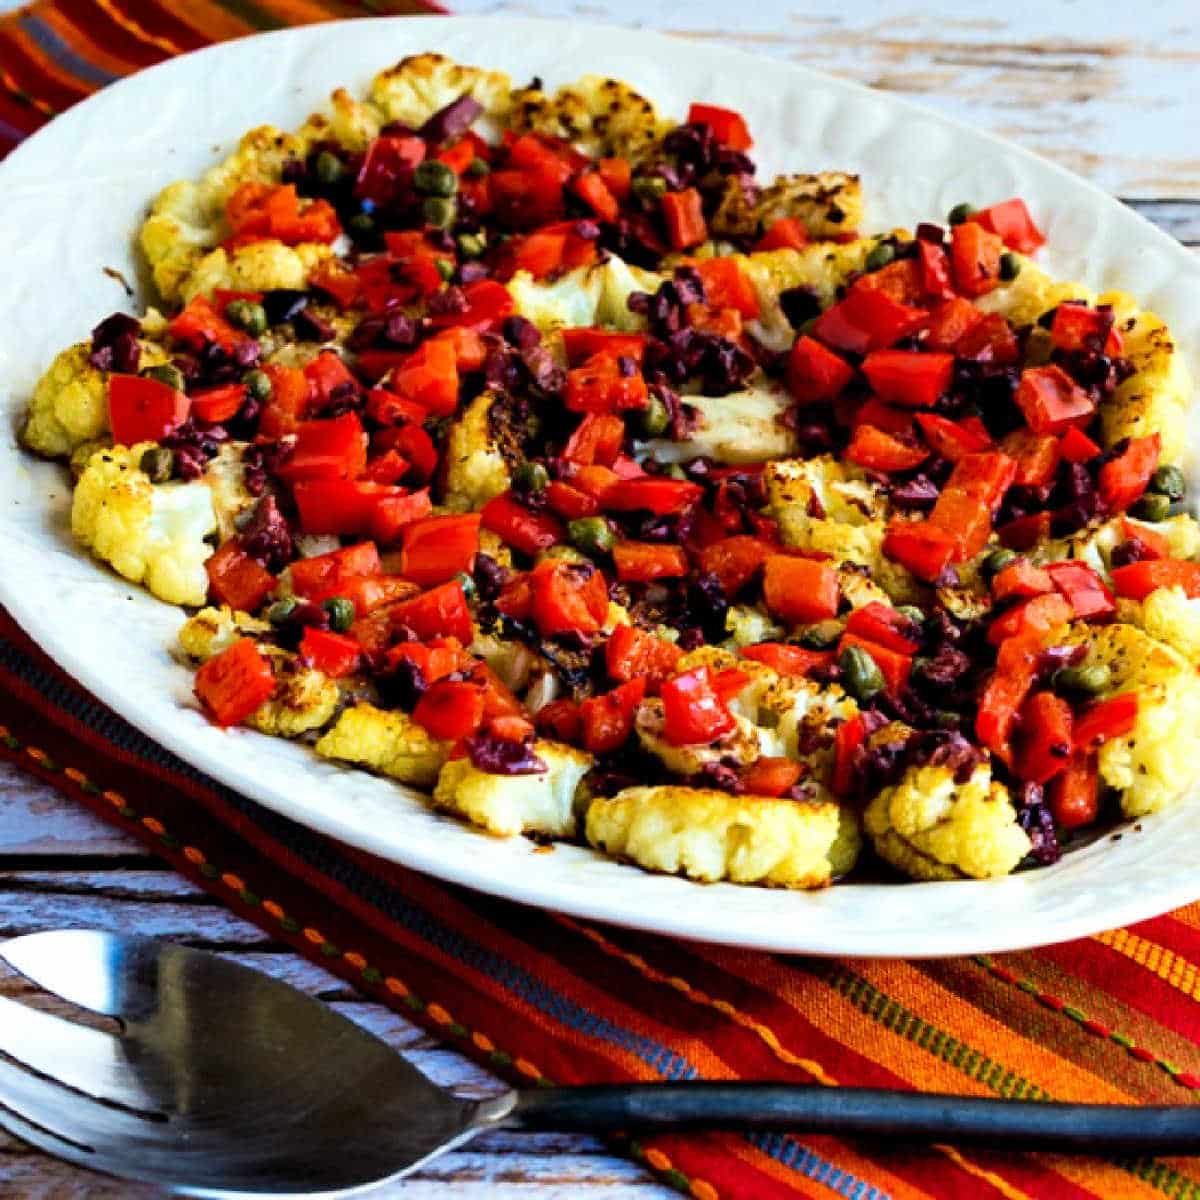 Roasted Cauliflower Steaks with Red Pepper, Capers, and Olives shown on serving platter with serving spoon